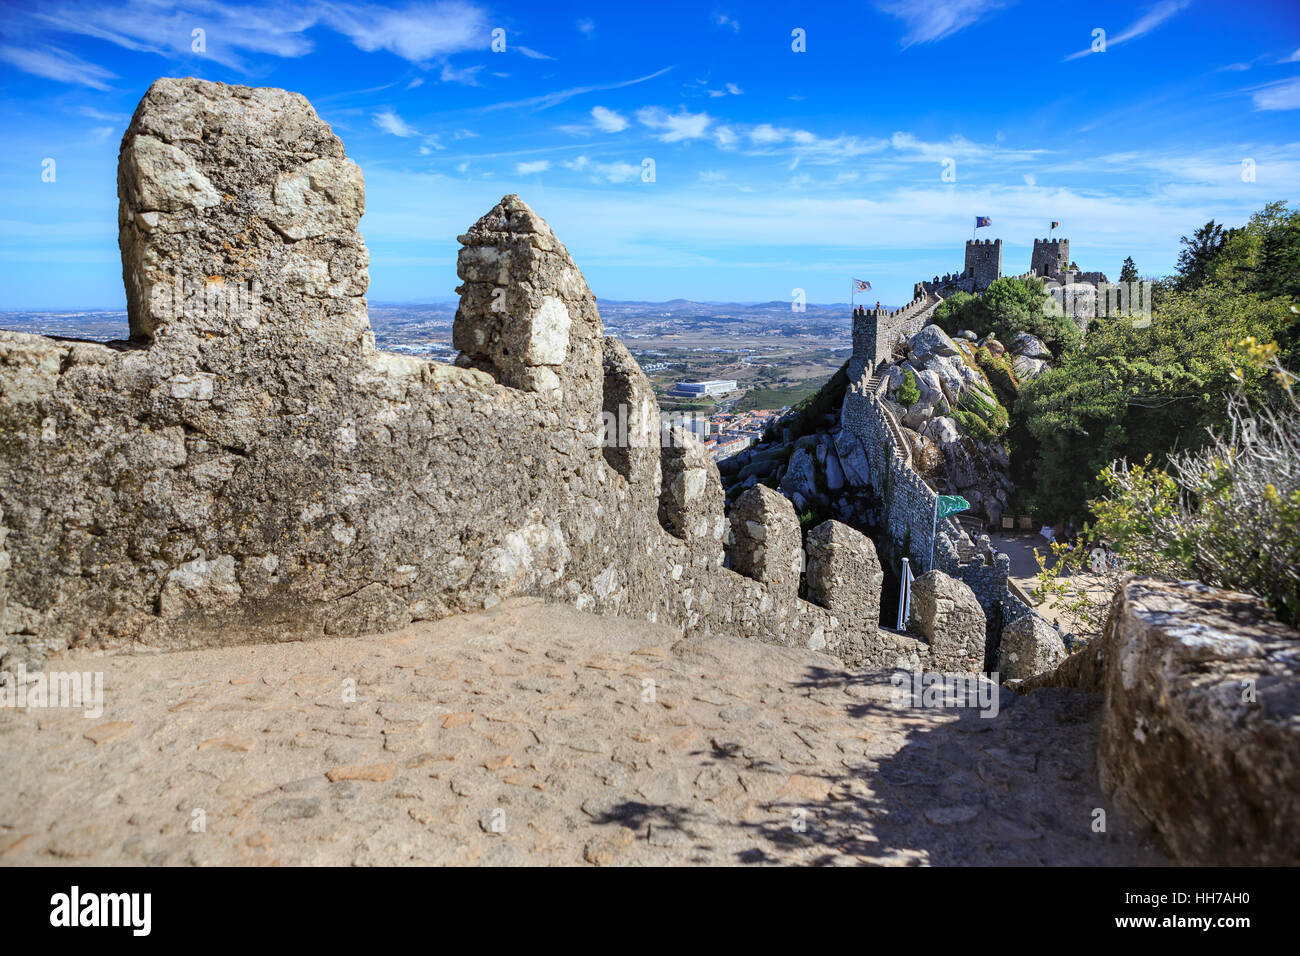 SINTRA, PORTUGAL - CIRCA OCTOBER, 2016:  The Castelo dos Mouros alias The Castle of the Moors in Sintra, Portugal Stock Photo